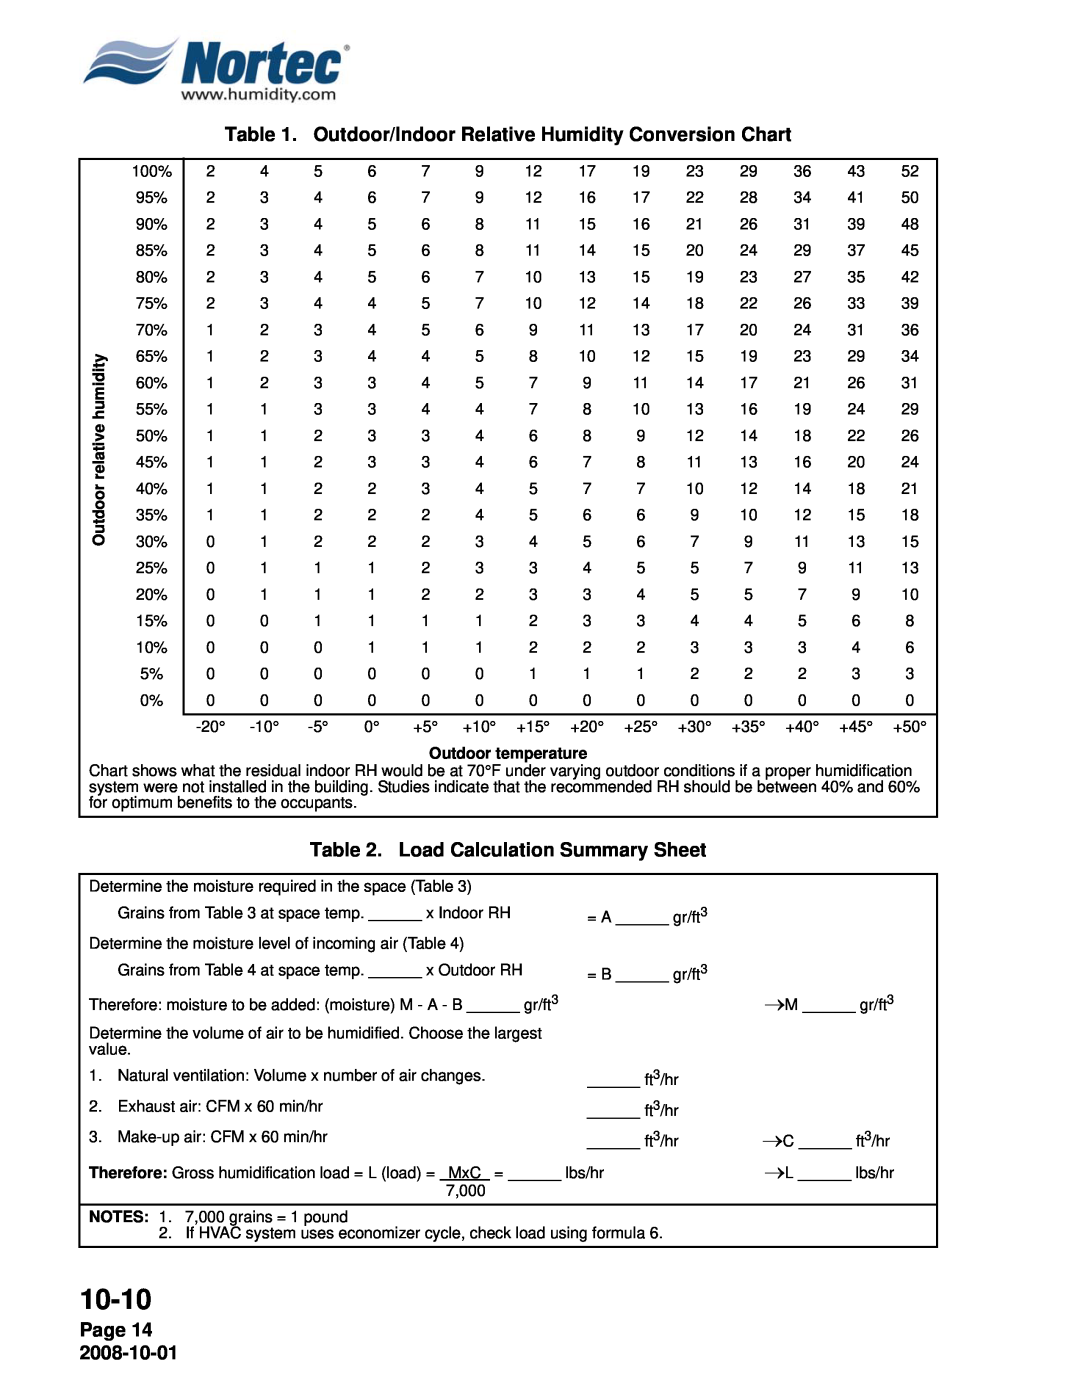 Nortec NHPC, NHTC manual 10-10, Load Calculation Summary Sheet, Page 14, Outdoor relative humidity, Outdoor temperature 